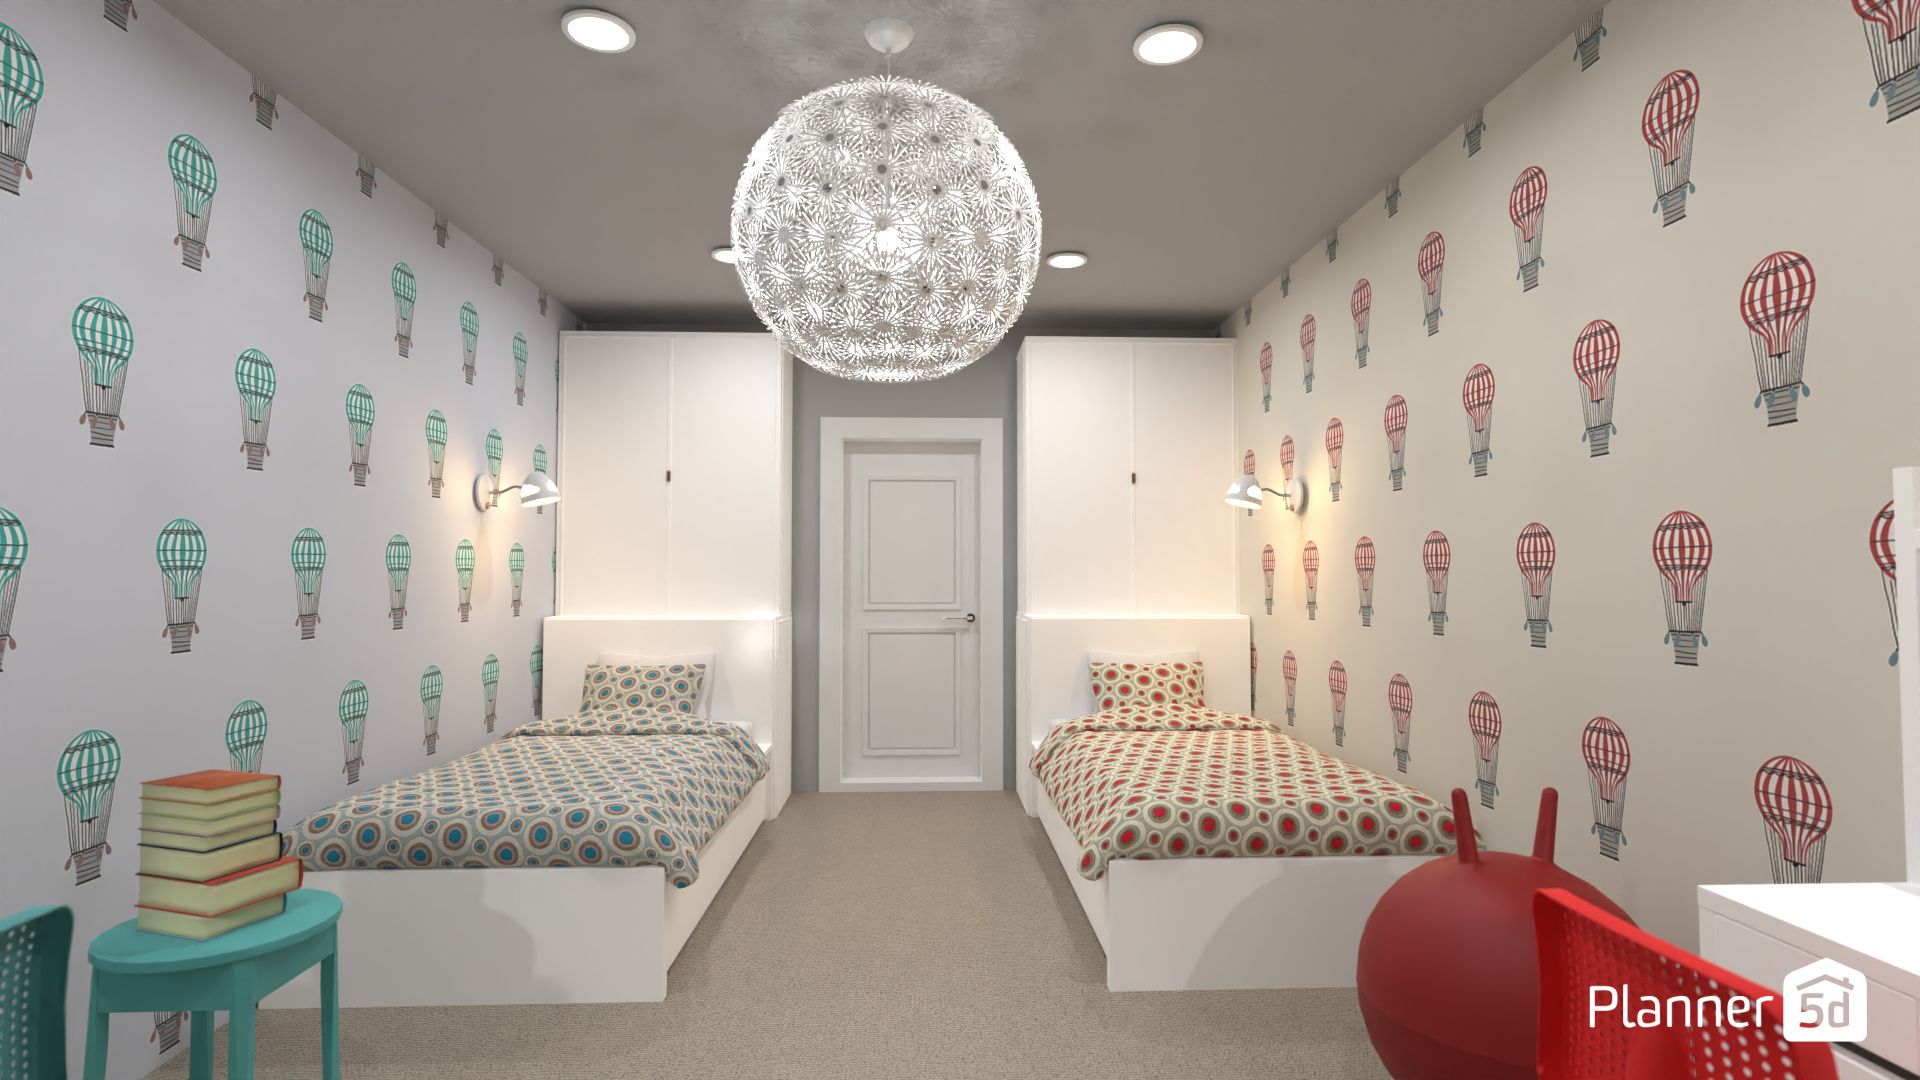 Contest - kids' room 19859836 by Rita image